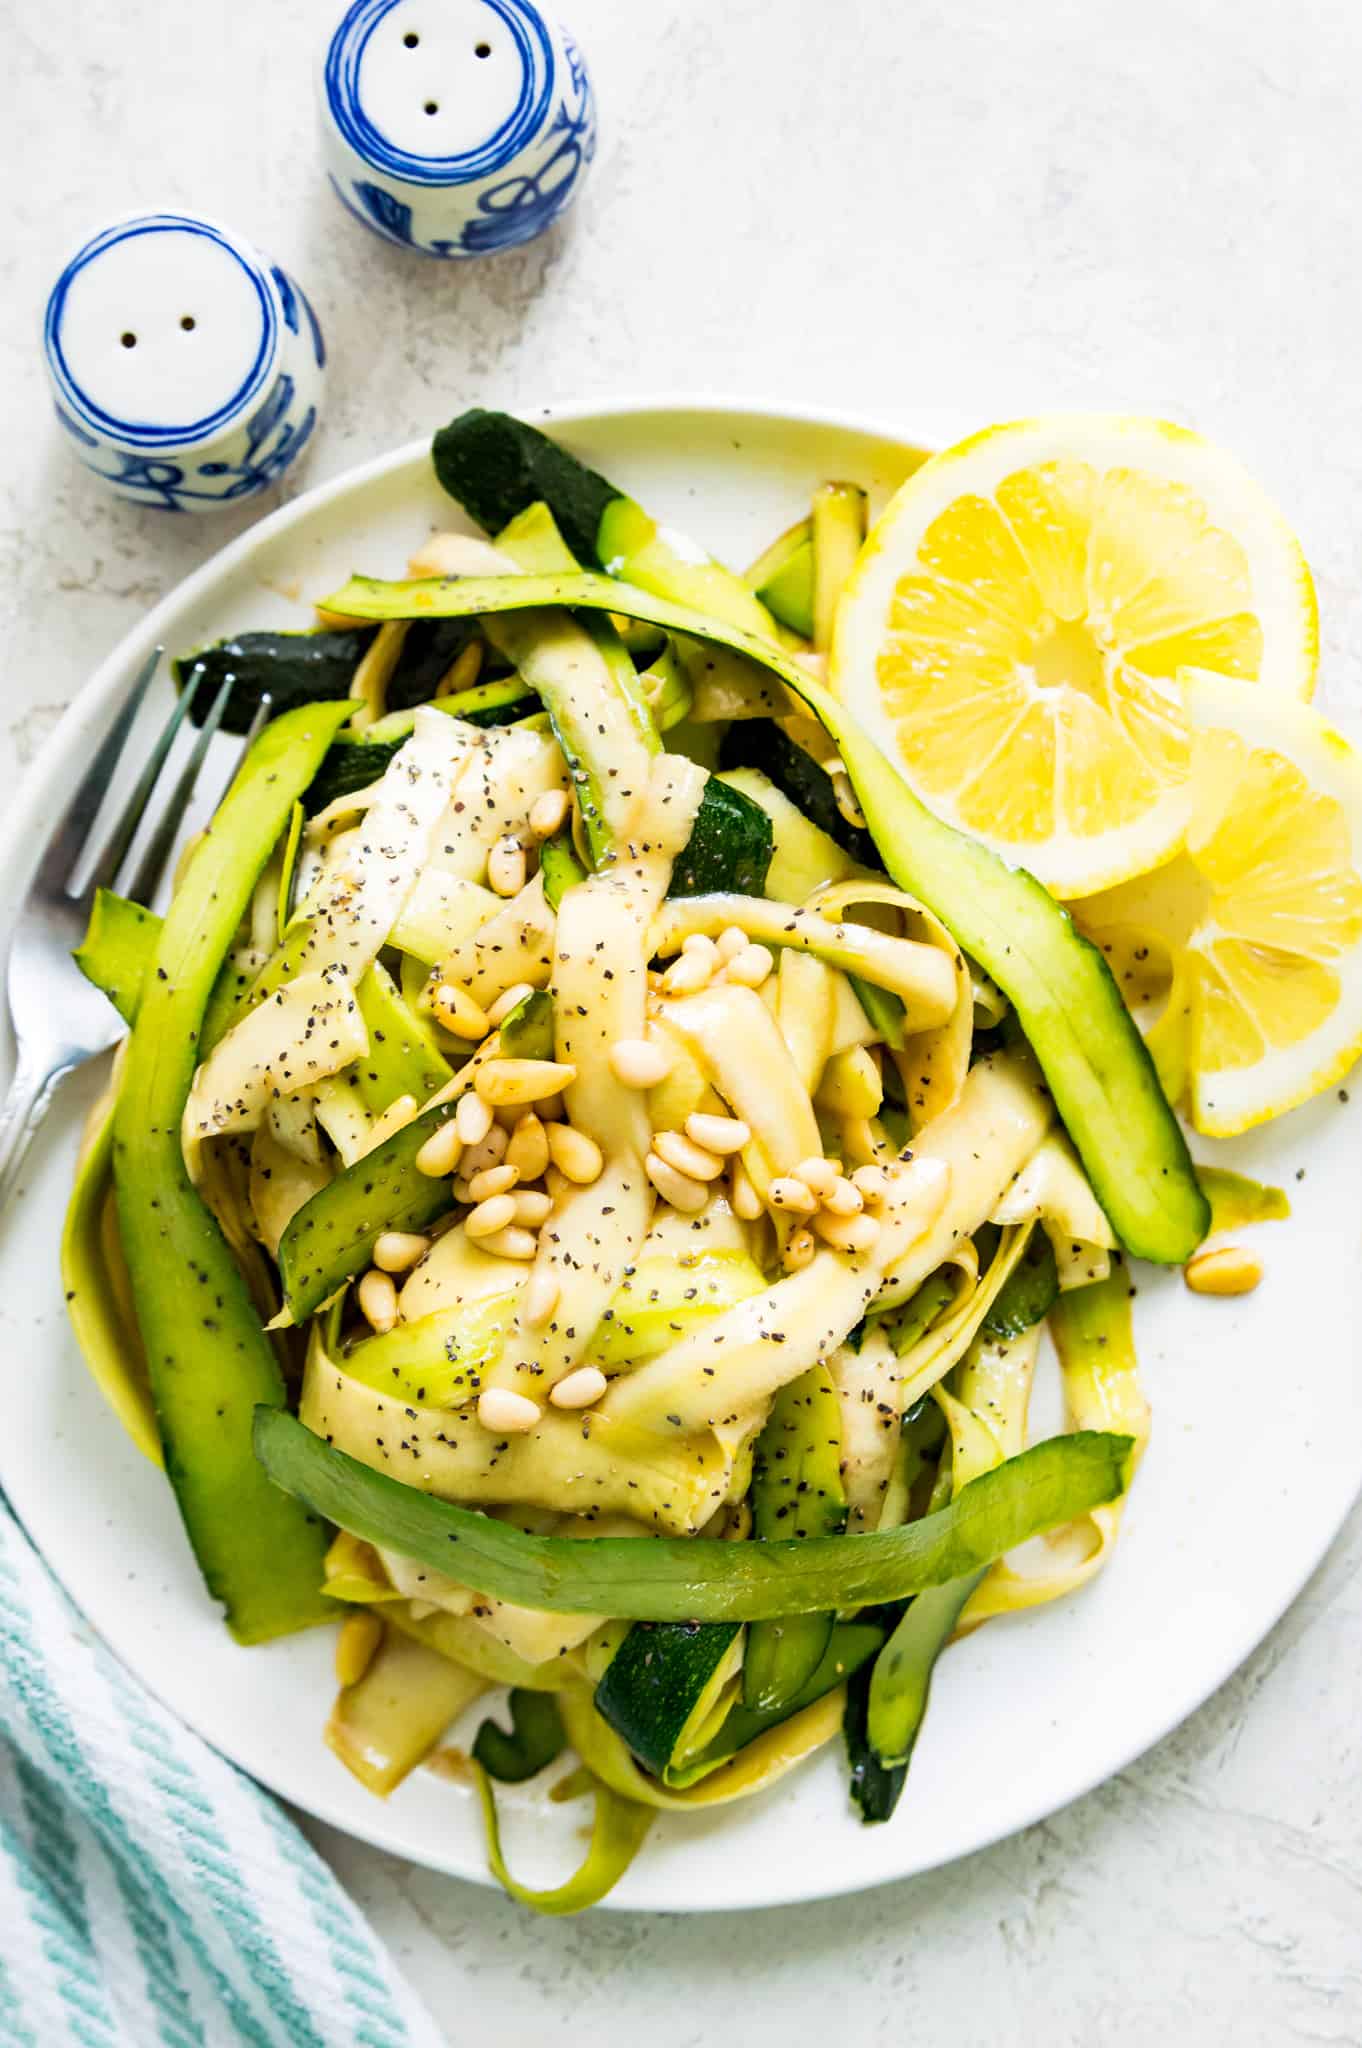 A raw courgette salad on a plate with lemon wedges